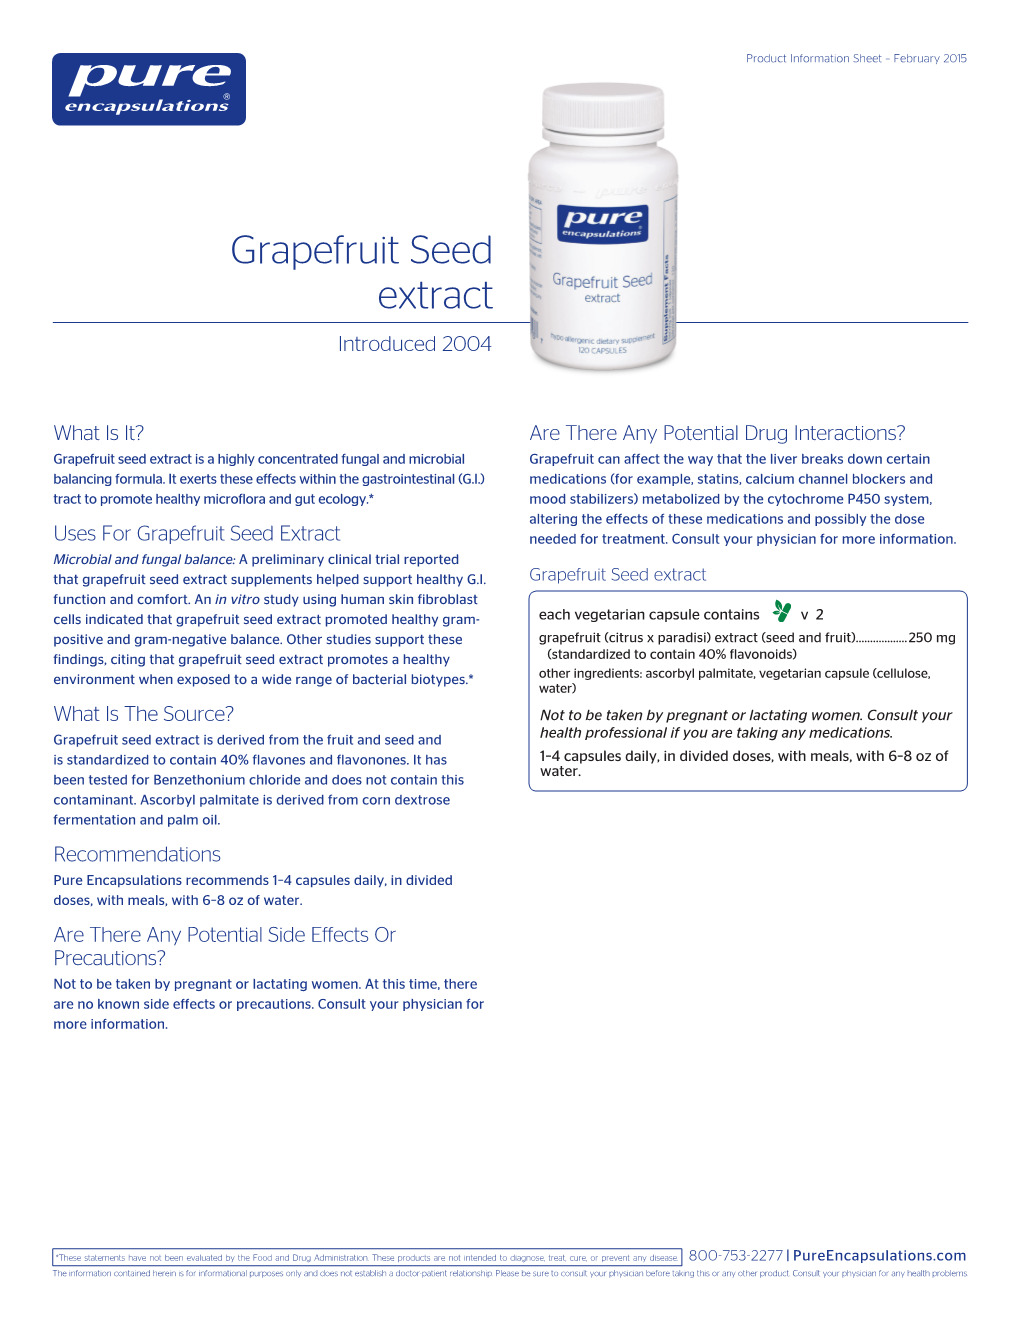 Grapefruit Seed Extract Introduced 2004